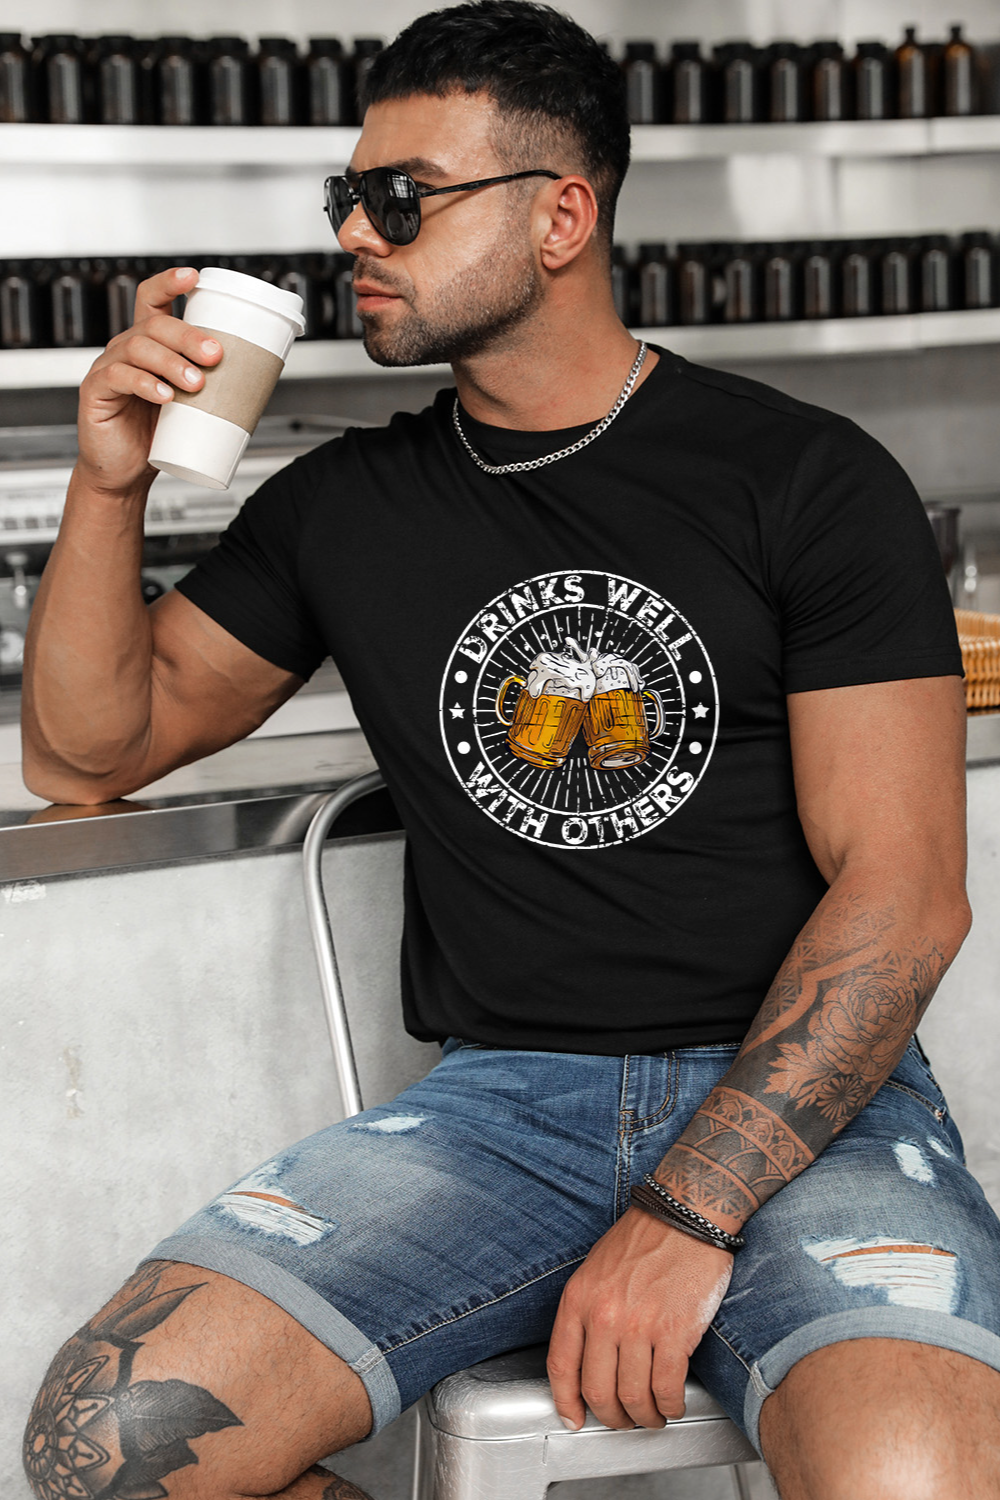 Drink well with others tee